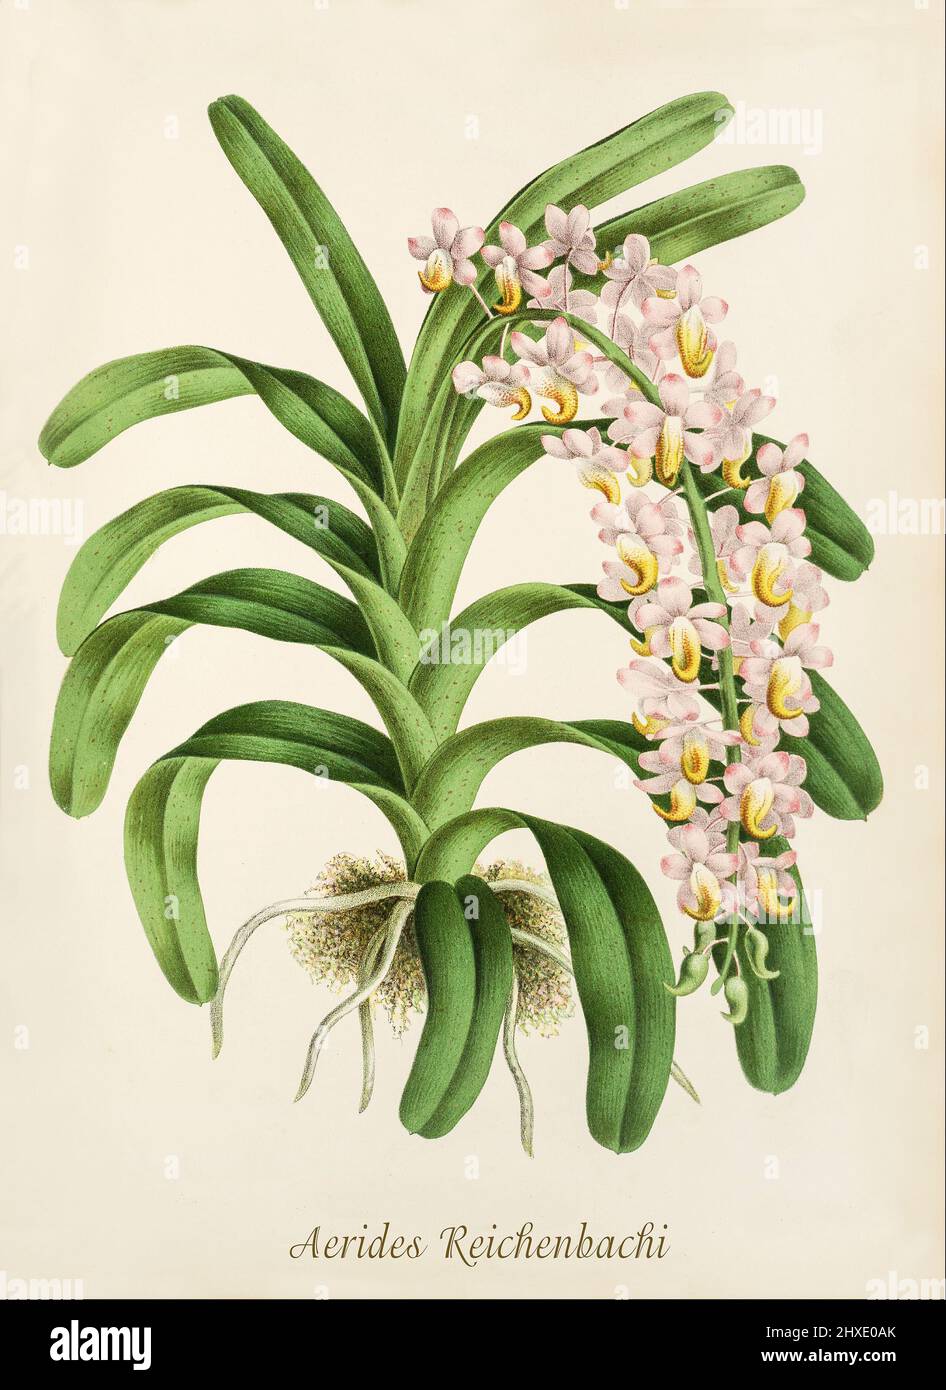 Aerides Reichenbachi now Aerides odorata, one of a group of tropical epiphyte orchids that grow mainly in the warm lowlands of tropical Asia from India to southern China to New Guinea.  From Iconographie des Orchidees, a magazine of botanical illustrations published by Jean Jules Linden (1817-1898) was a Belgian botanist, explorer and horticulturist who specialised in orchids. Stock Photo